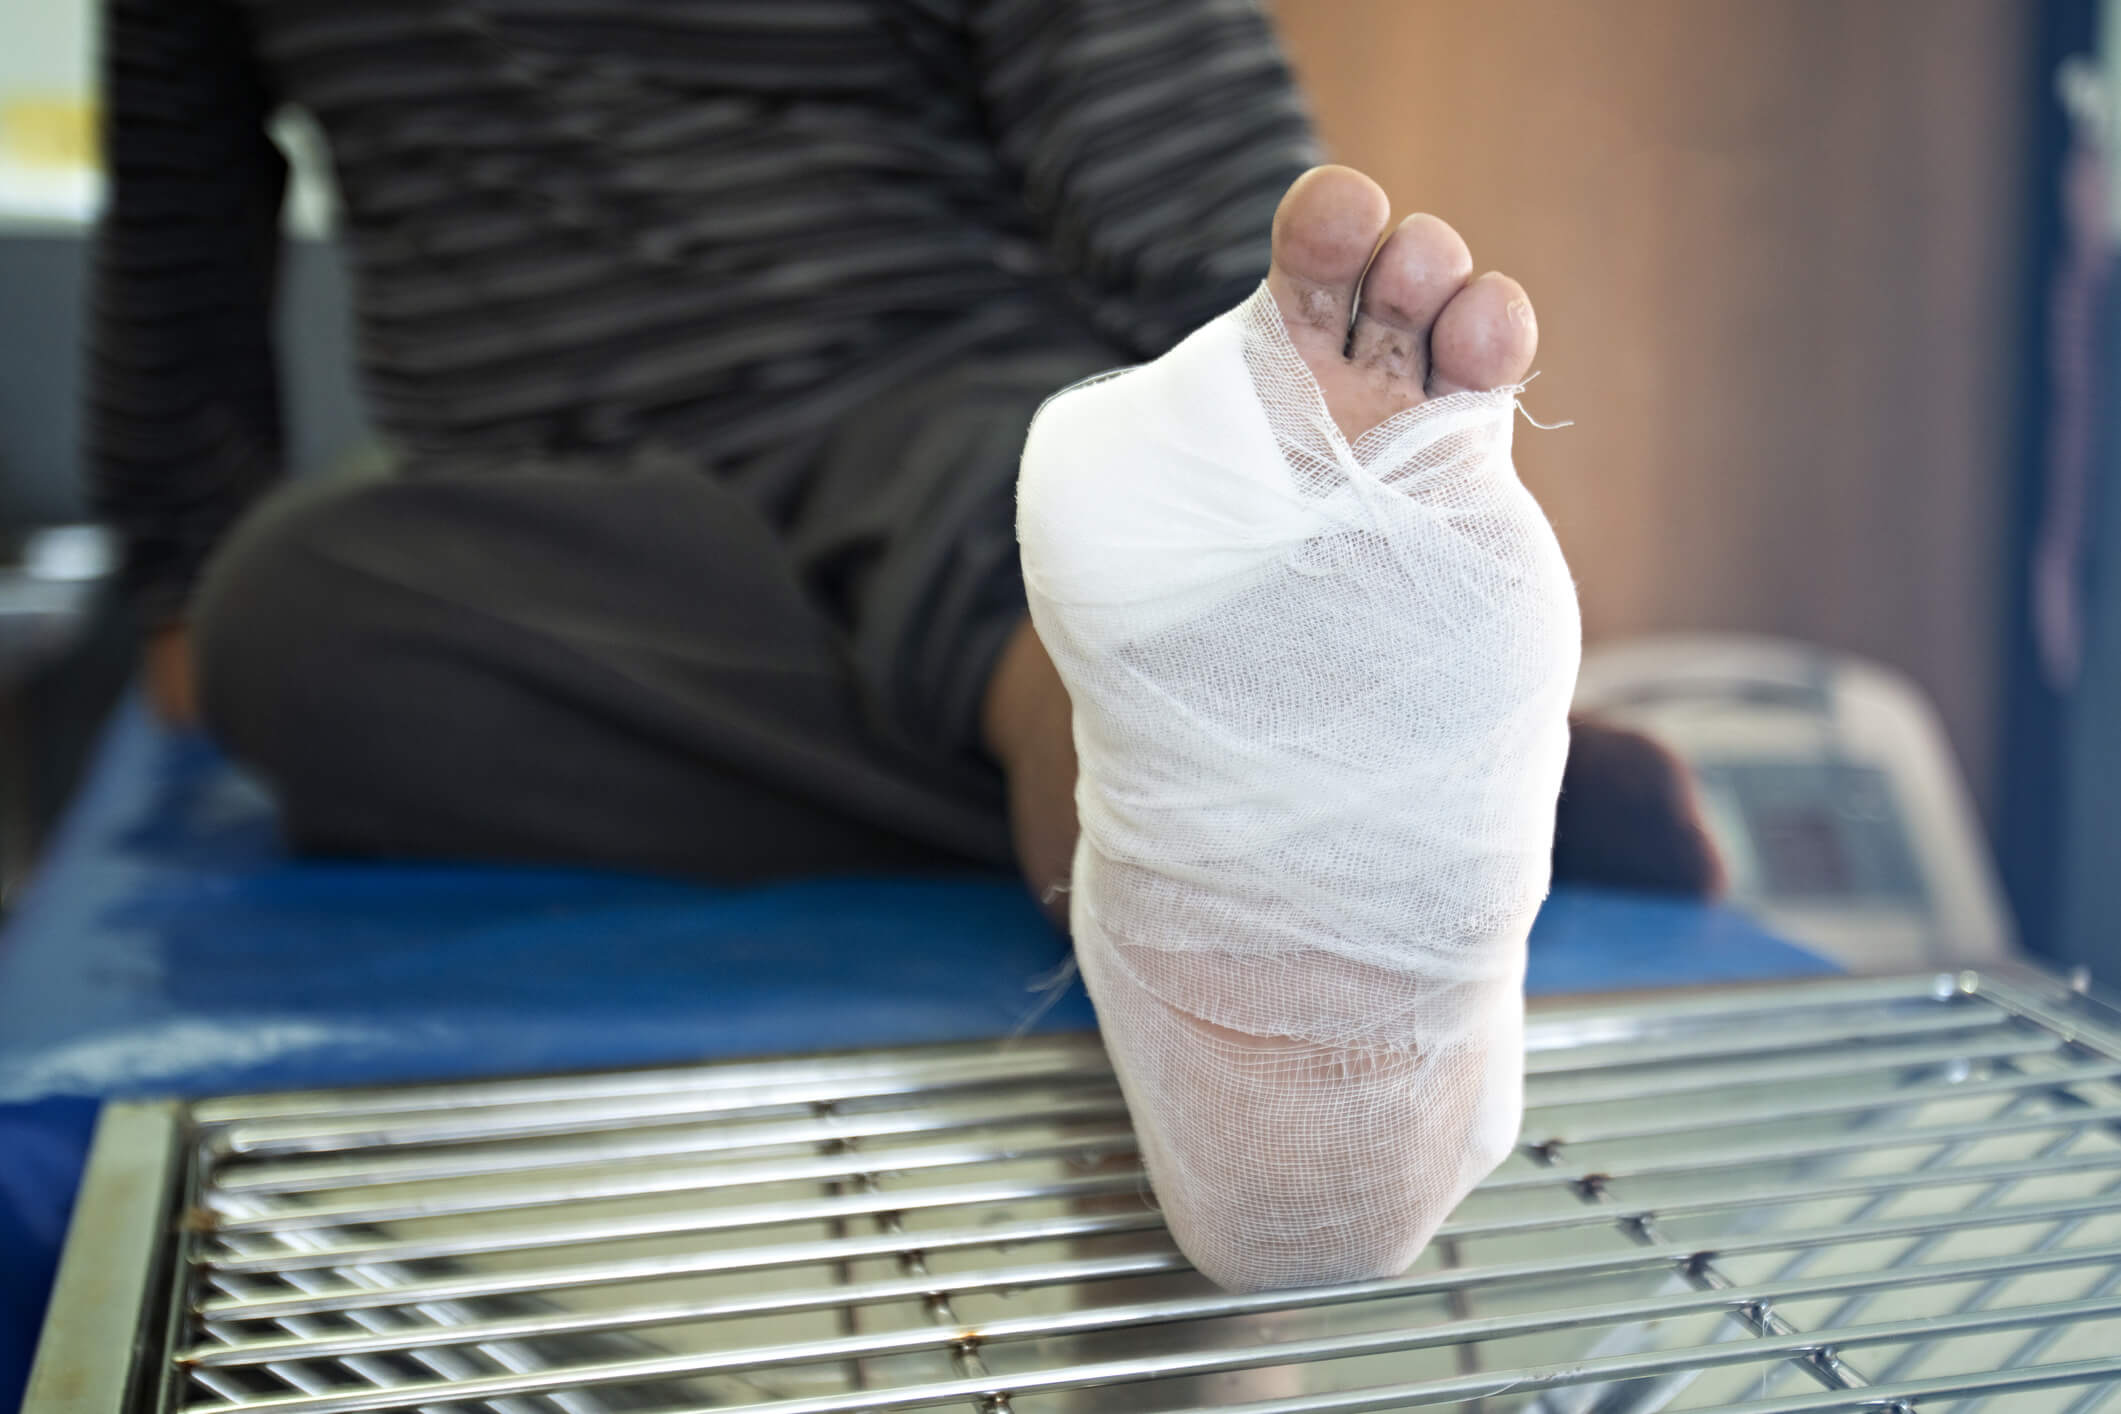 The diabetic foot: how to predict and assess the risk of wounds?